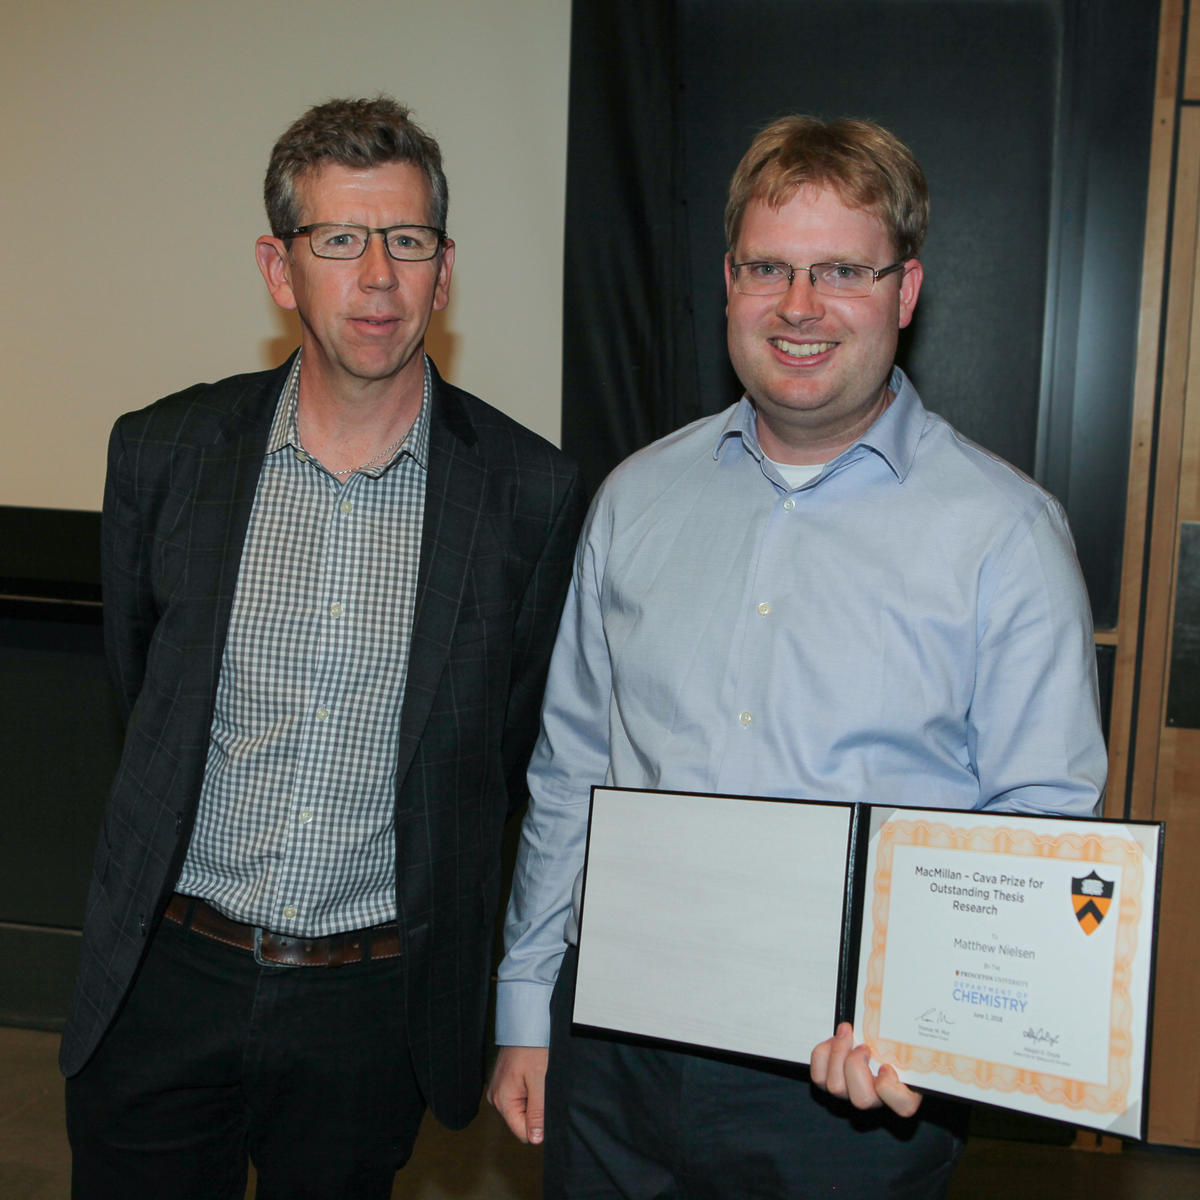 Tom Muir and Matthew Nielsen (Doyle lab), recipient of the MacMillan-Cava Prize for Outstanding Thesis Research